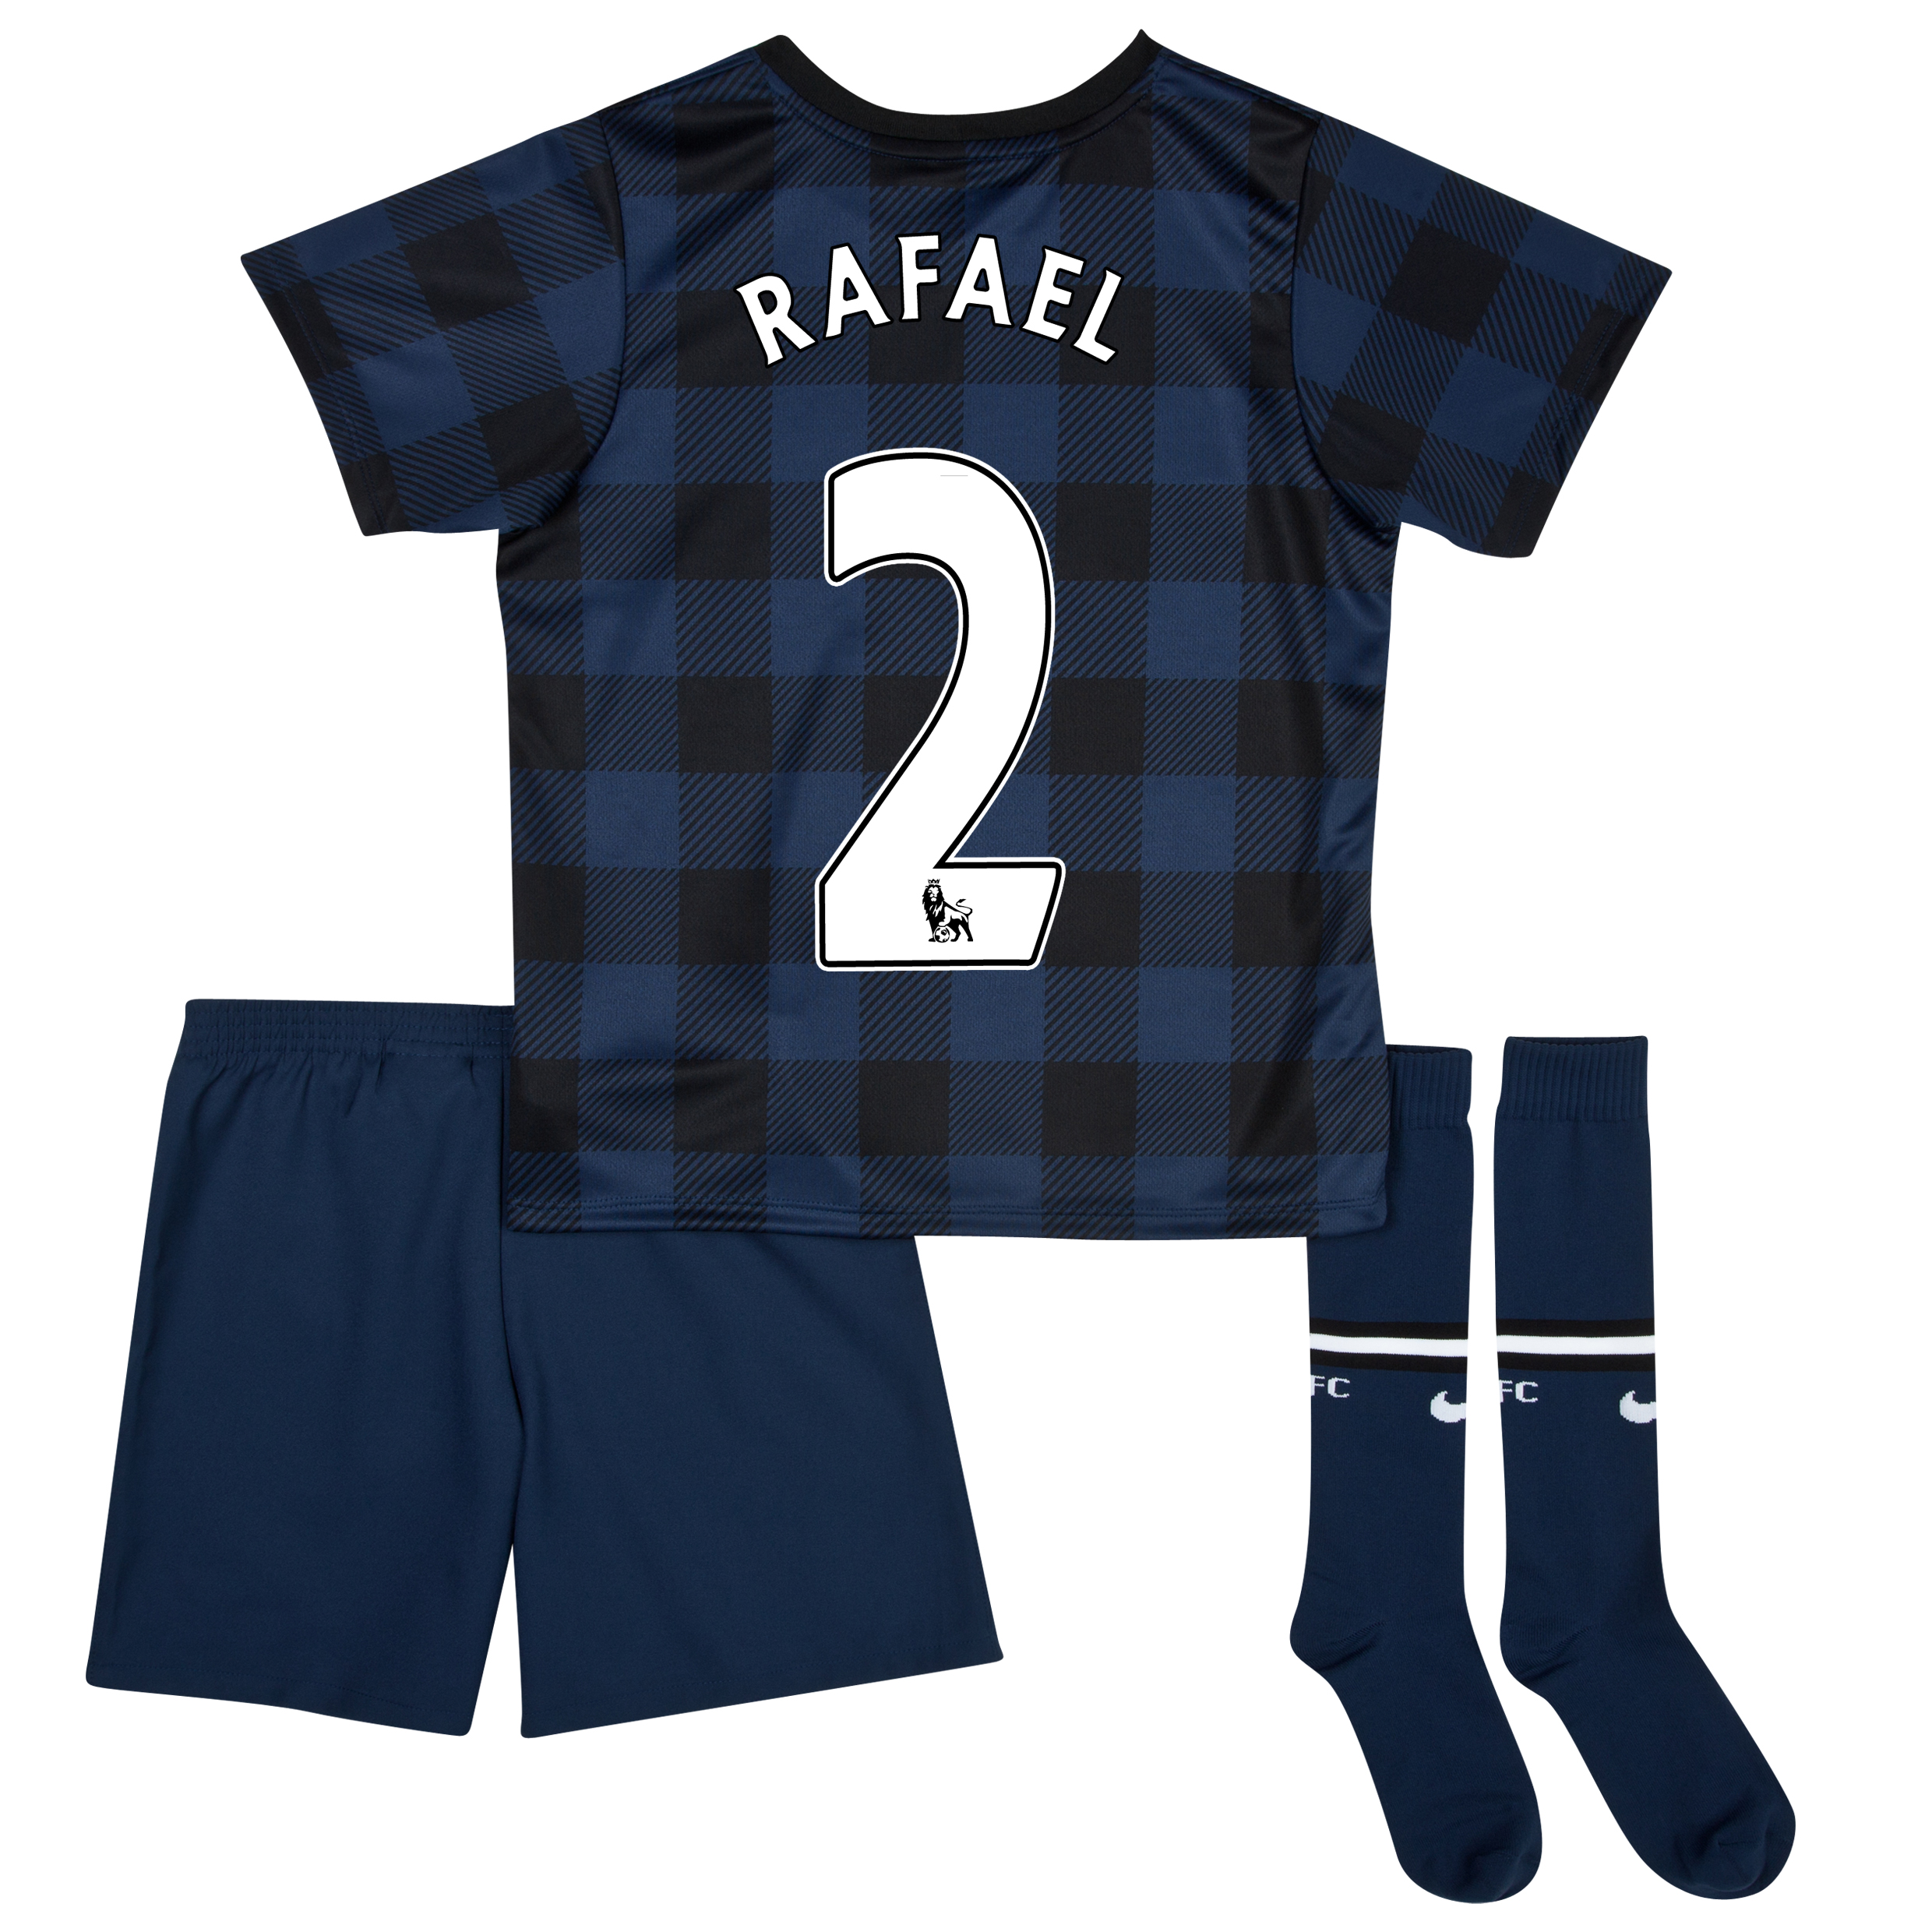 Manchester United Away Kit 2013/14 - Little Boys with Rafael 2 printing